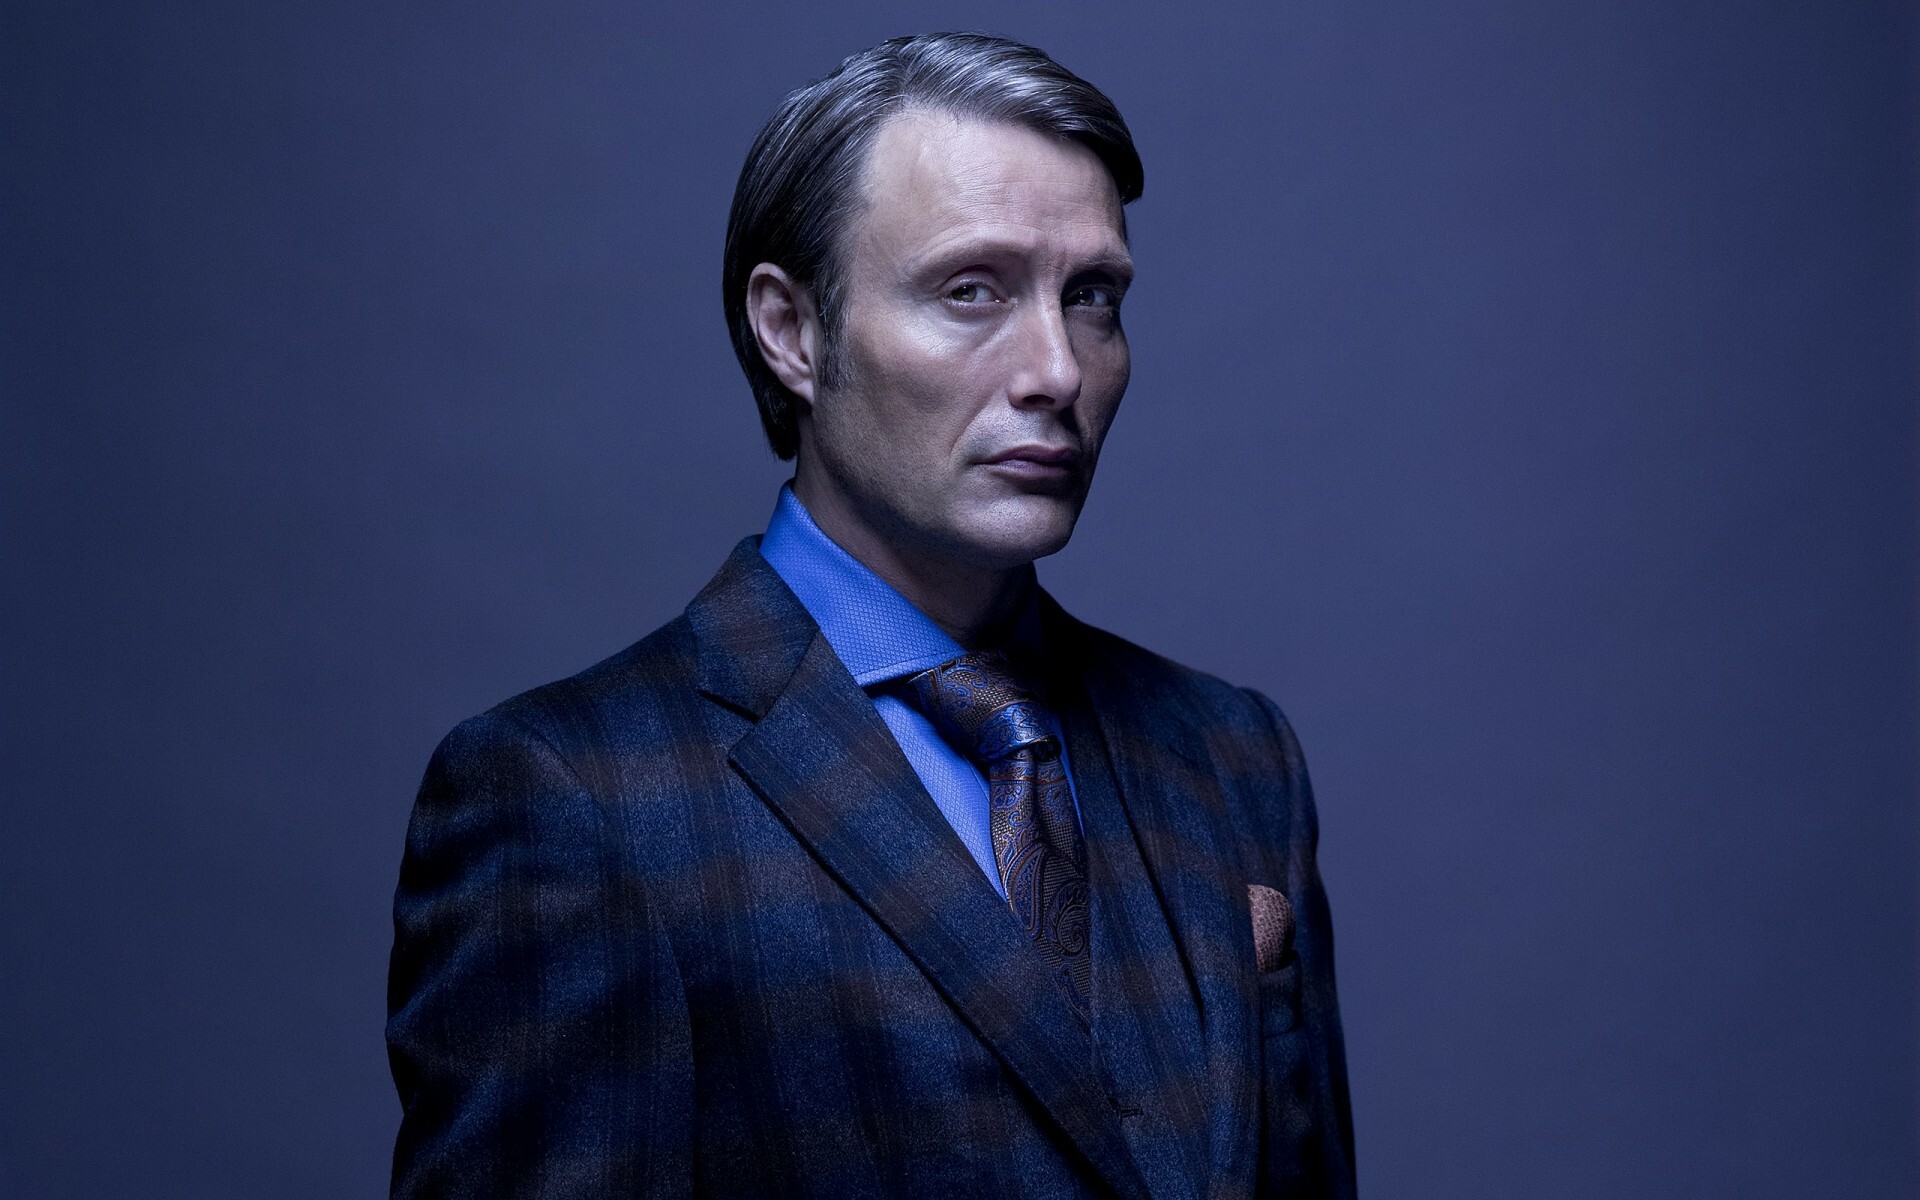 Hannibal (TV Series): Dr. Lecter, accomplished psychiatrist, and sociopathic serial killer known as the Chesapeake Ripper. 1920x1200 HD Wallpaper.